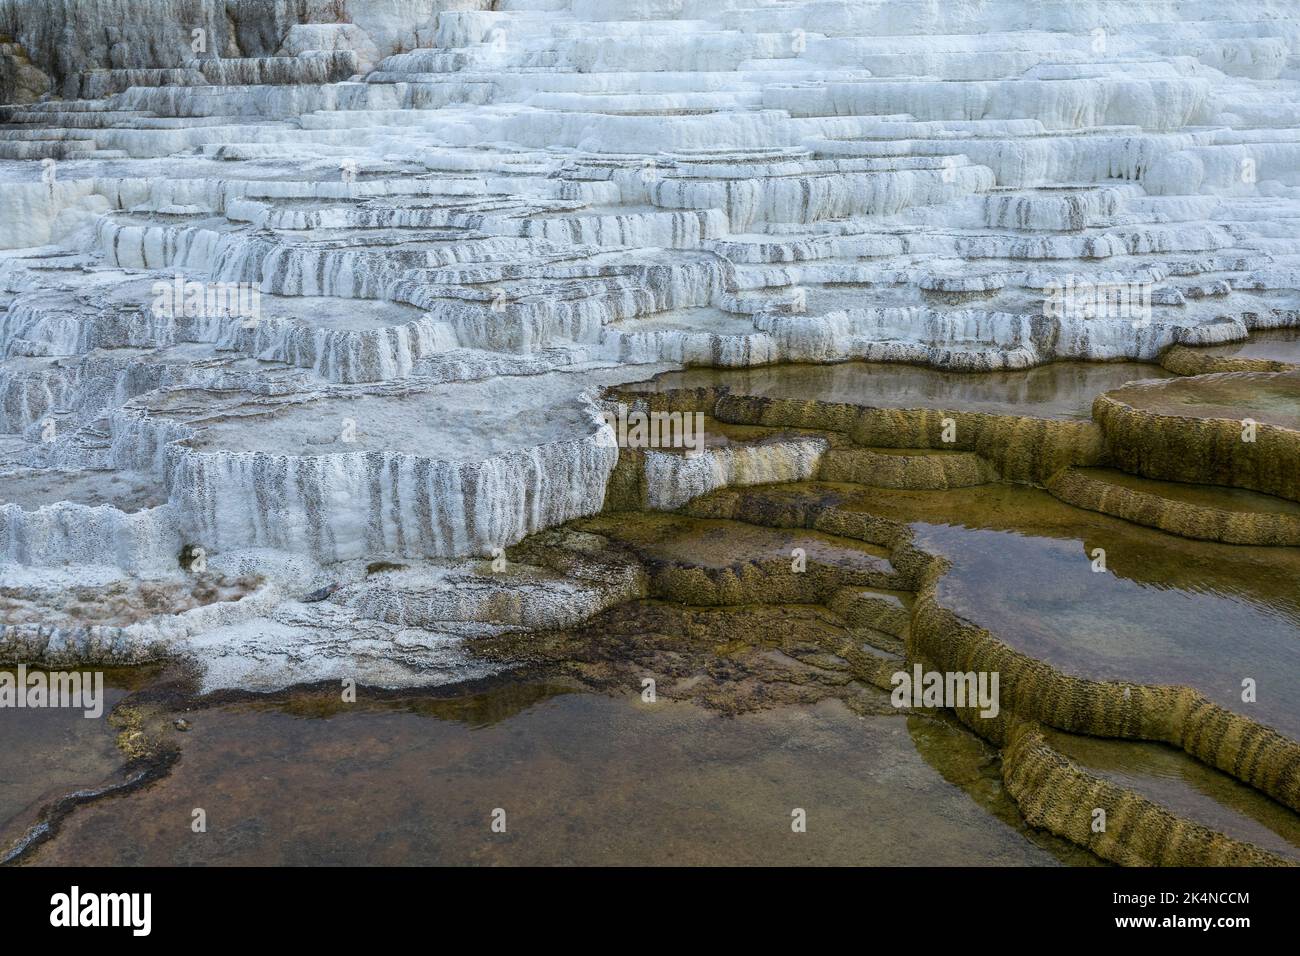 Mammoth Hot Springs, Yellowstone, États-Unis Banque D'Images